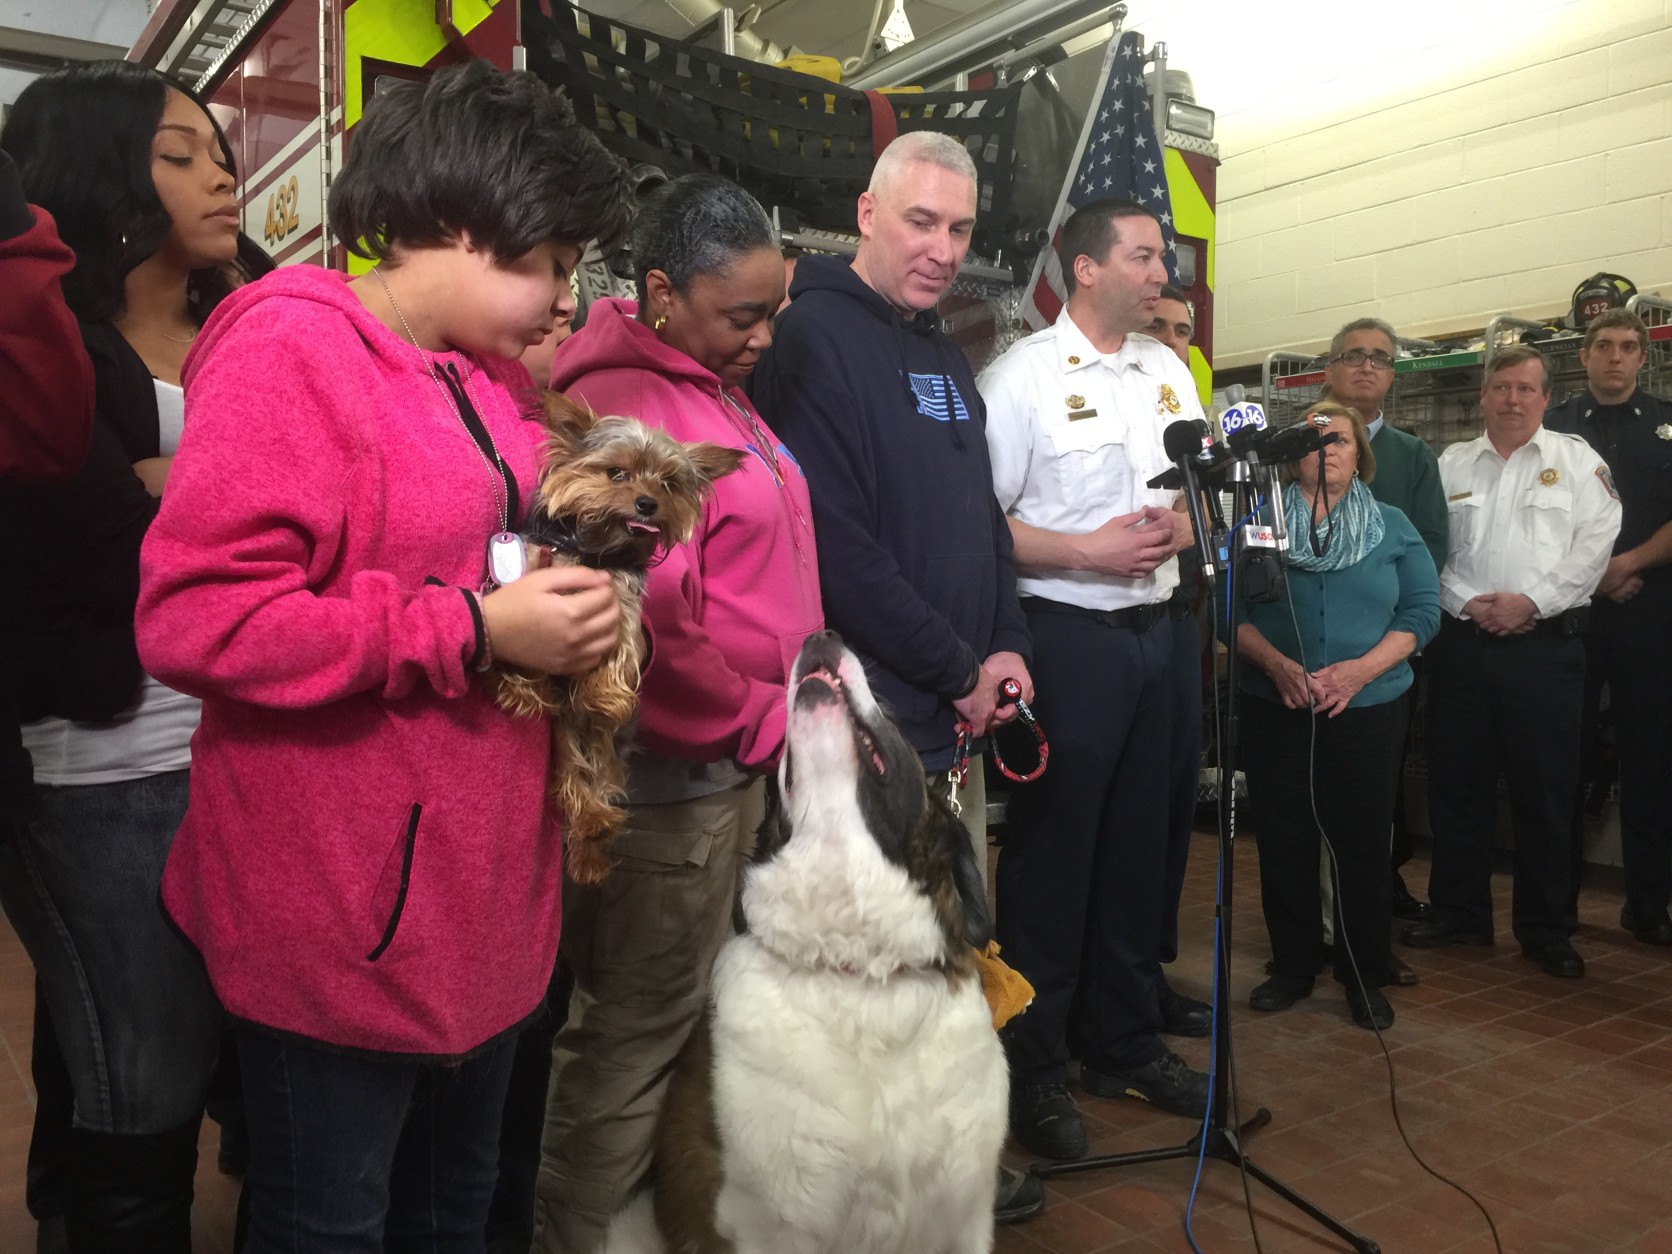 Yolanda Wortman deeply regrets letting Milo off his leash the day he fell through the ice. She says her family's little dog Gizmo listens better than Milo who flunked obedience school when he was 8 months old. "Because I couldn't reprimand him," Wortman said. "He's too lovable." (WTOP/Kristi King)